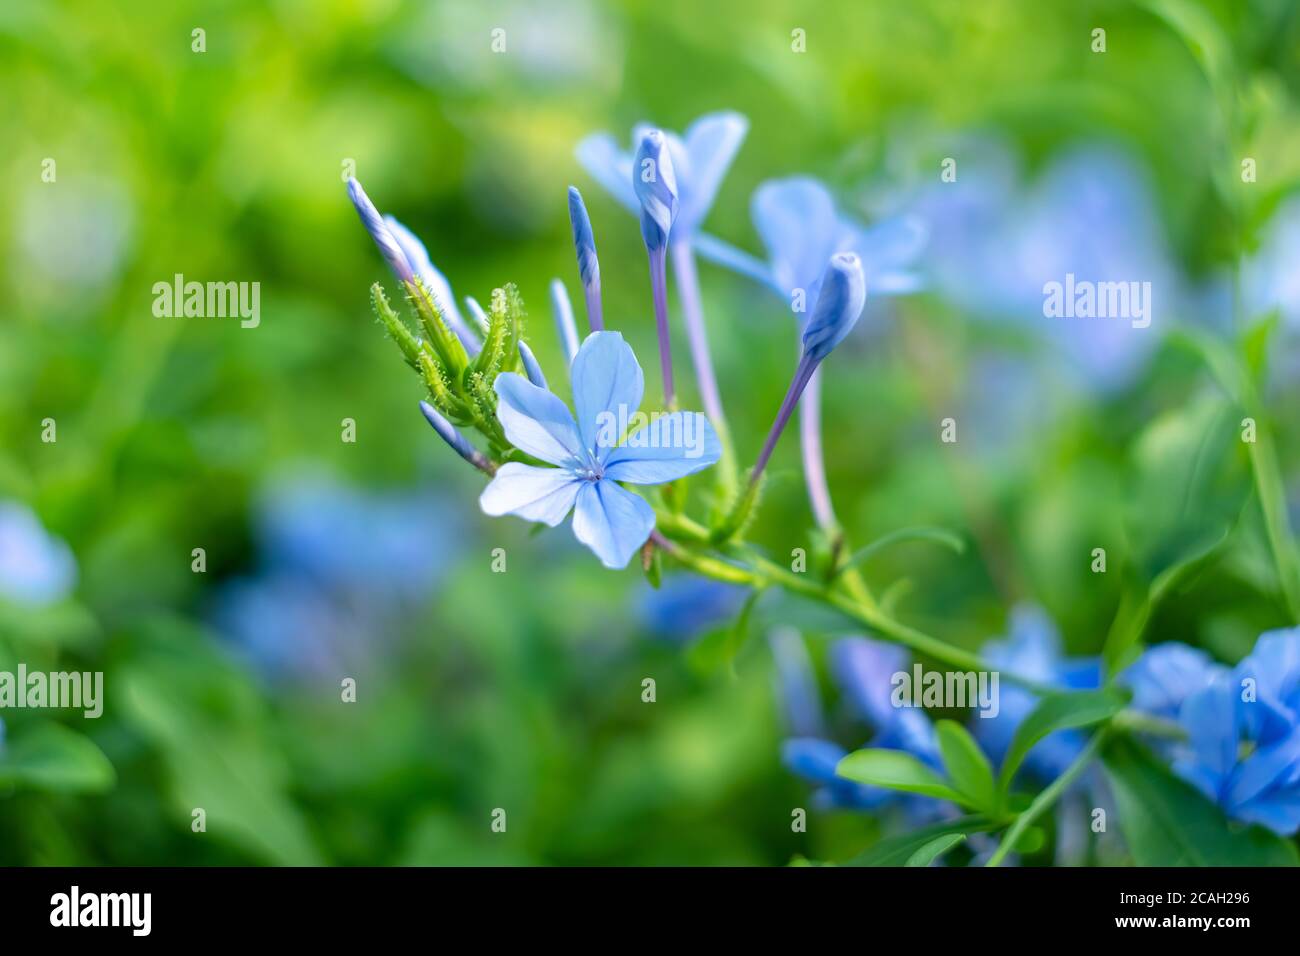 Blue periwinkle on a summer day, bright flowers in the garden. Floral wallpaper, nature backgrounds. Vinca plant in the open field, littorina growth. Stock Photo